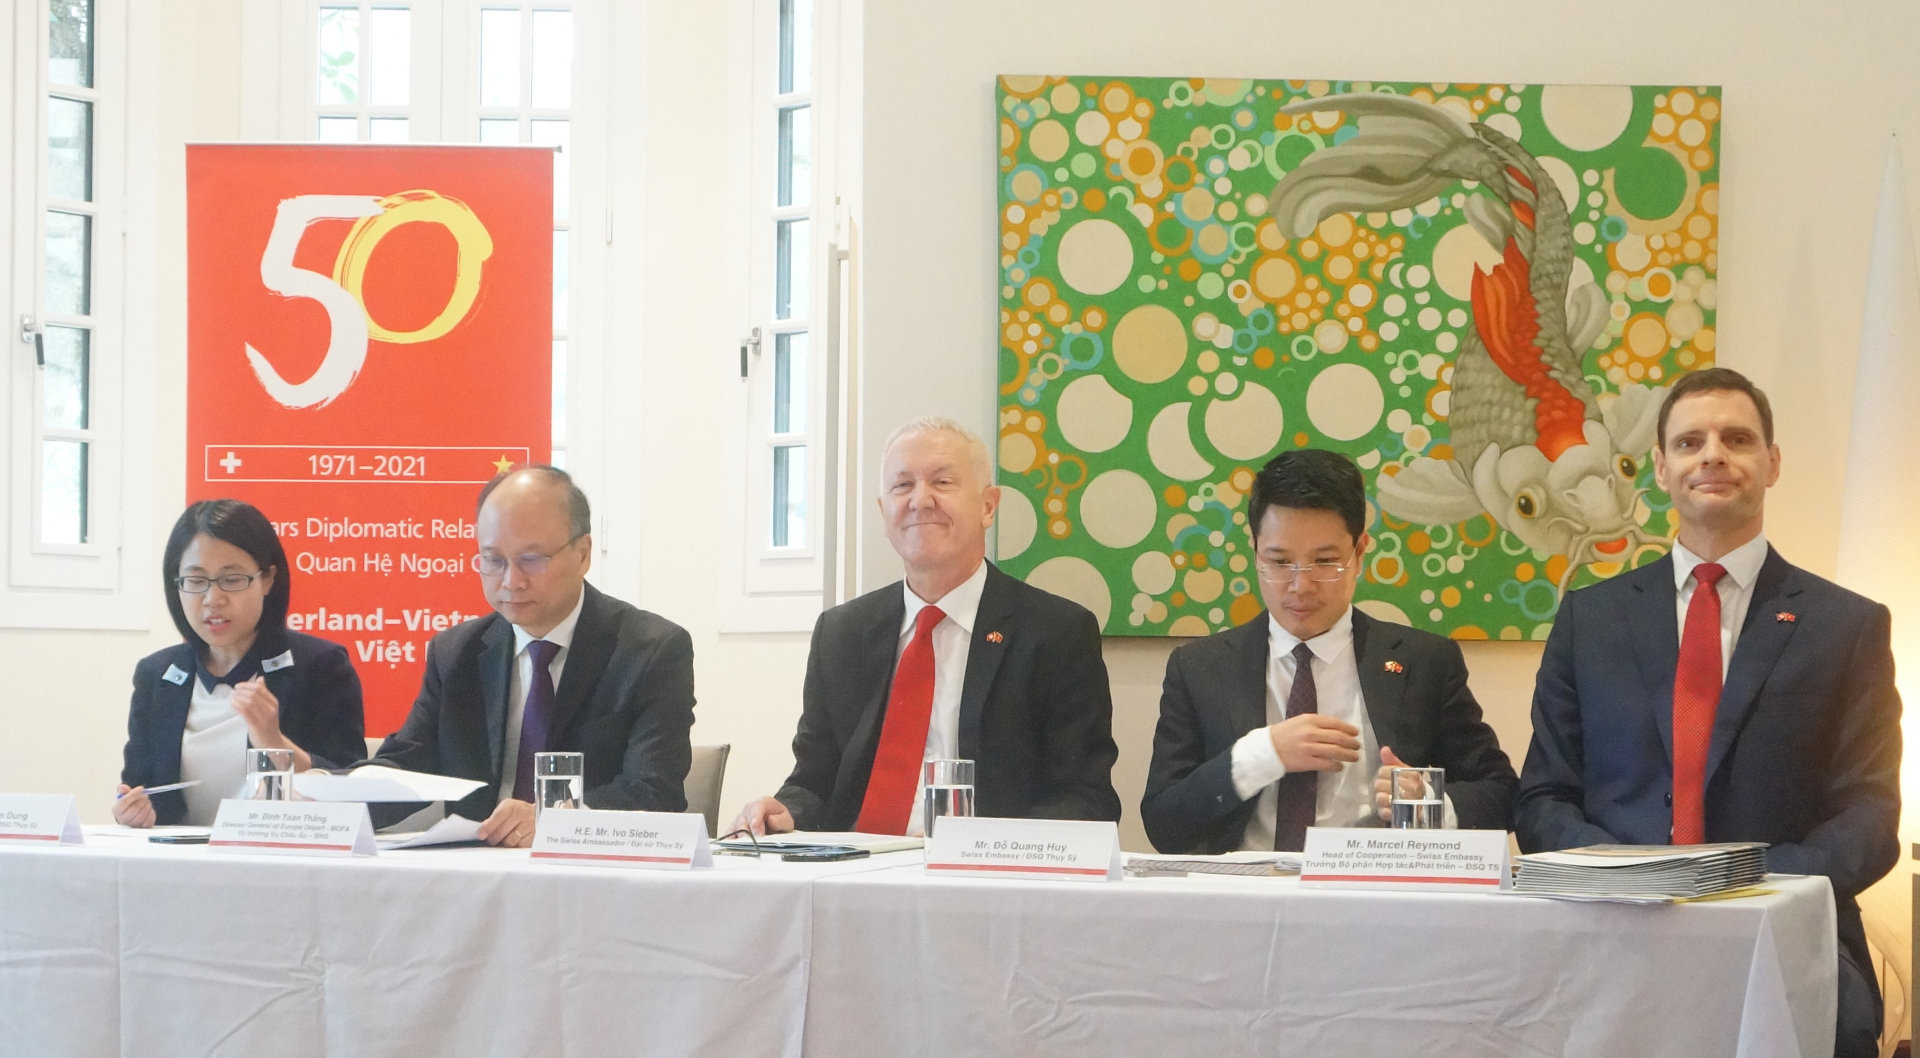 Commemorations to celebrate the 50th anniversary of Swiss-Vietnamese Diplomatic Relations in 2021 launched